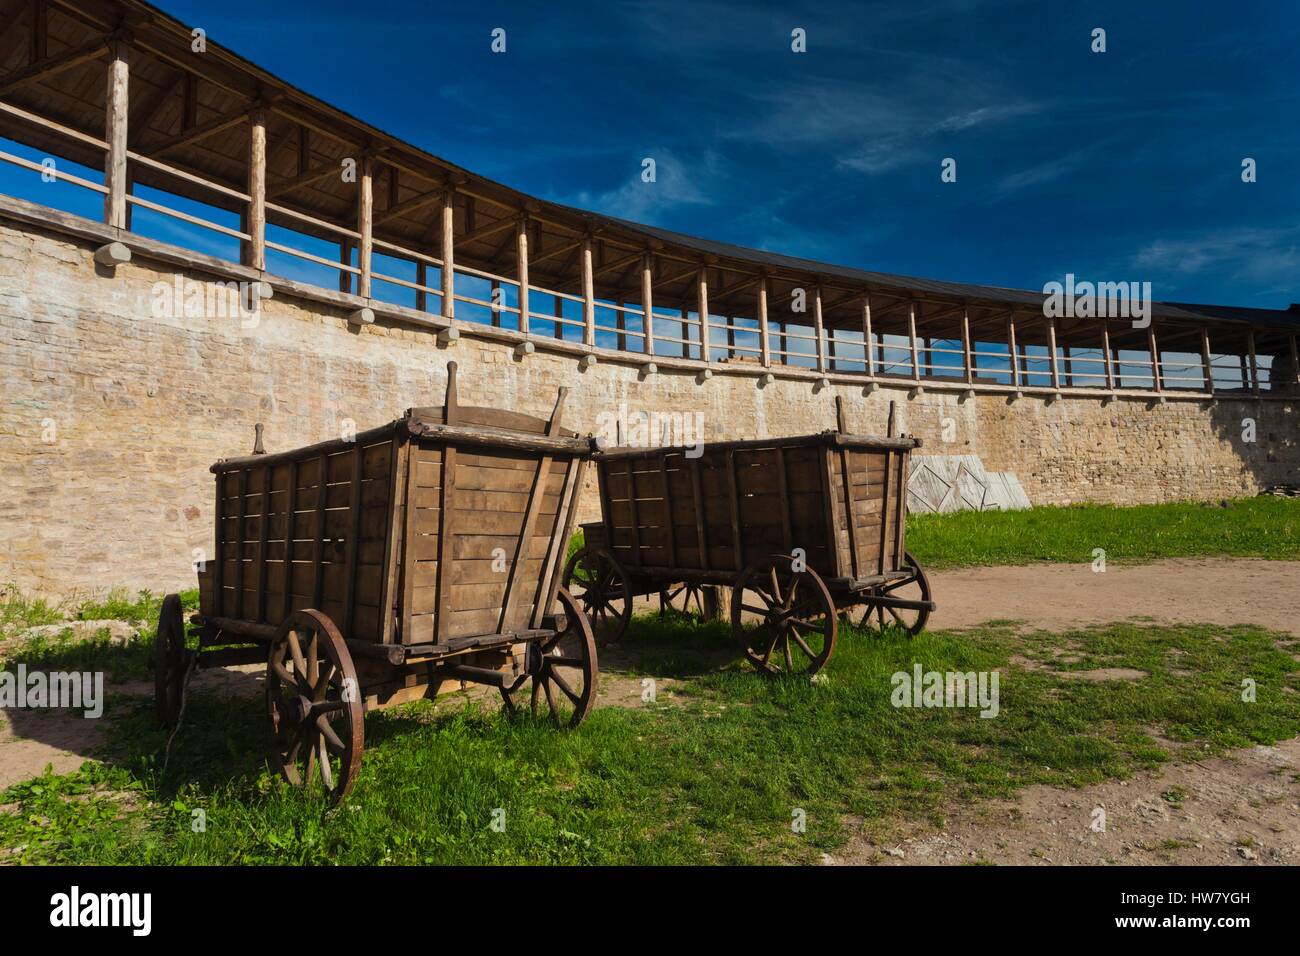 Russia, Pskovskaya Oblast, Stary Izborsk, ruins of the oldest stone fortress in Russia, inner walls Stock Photo